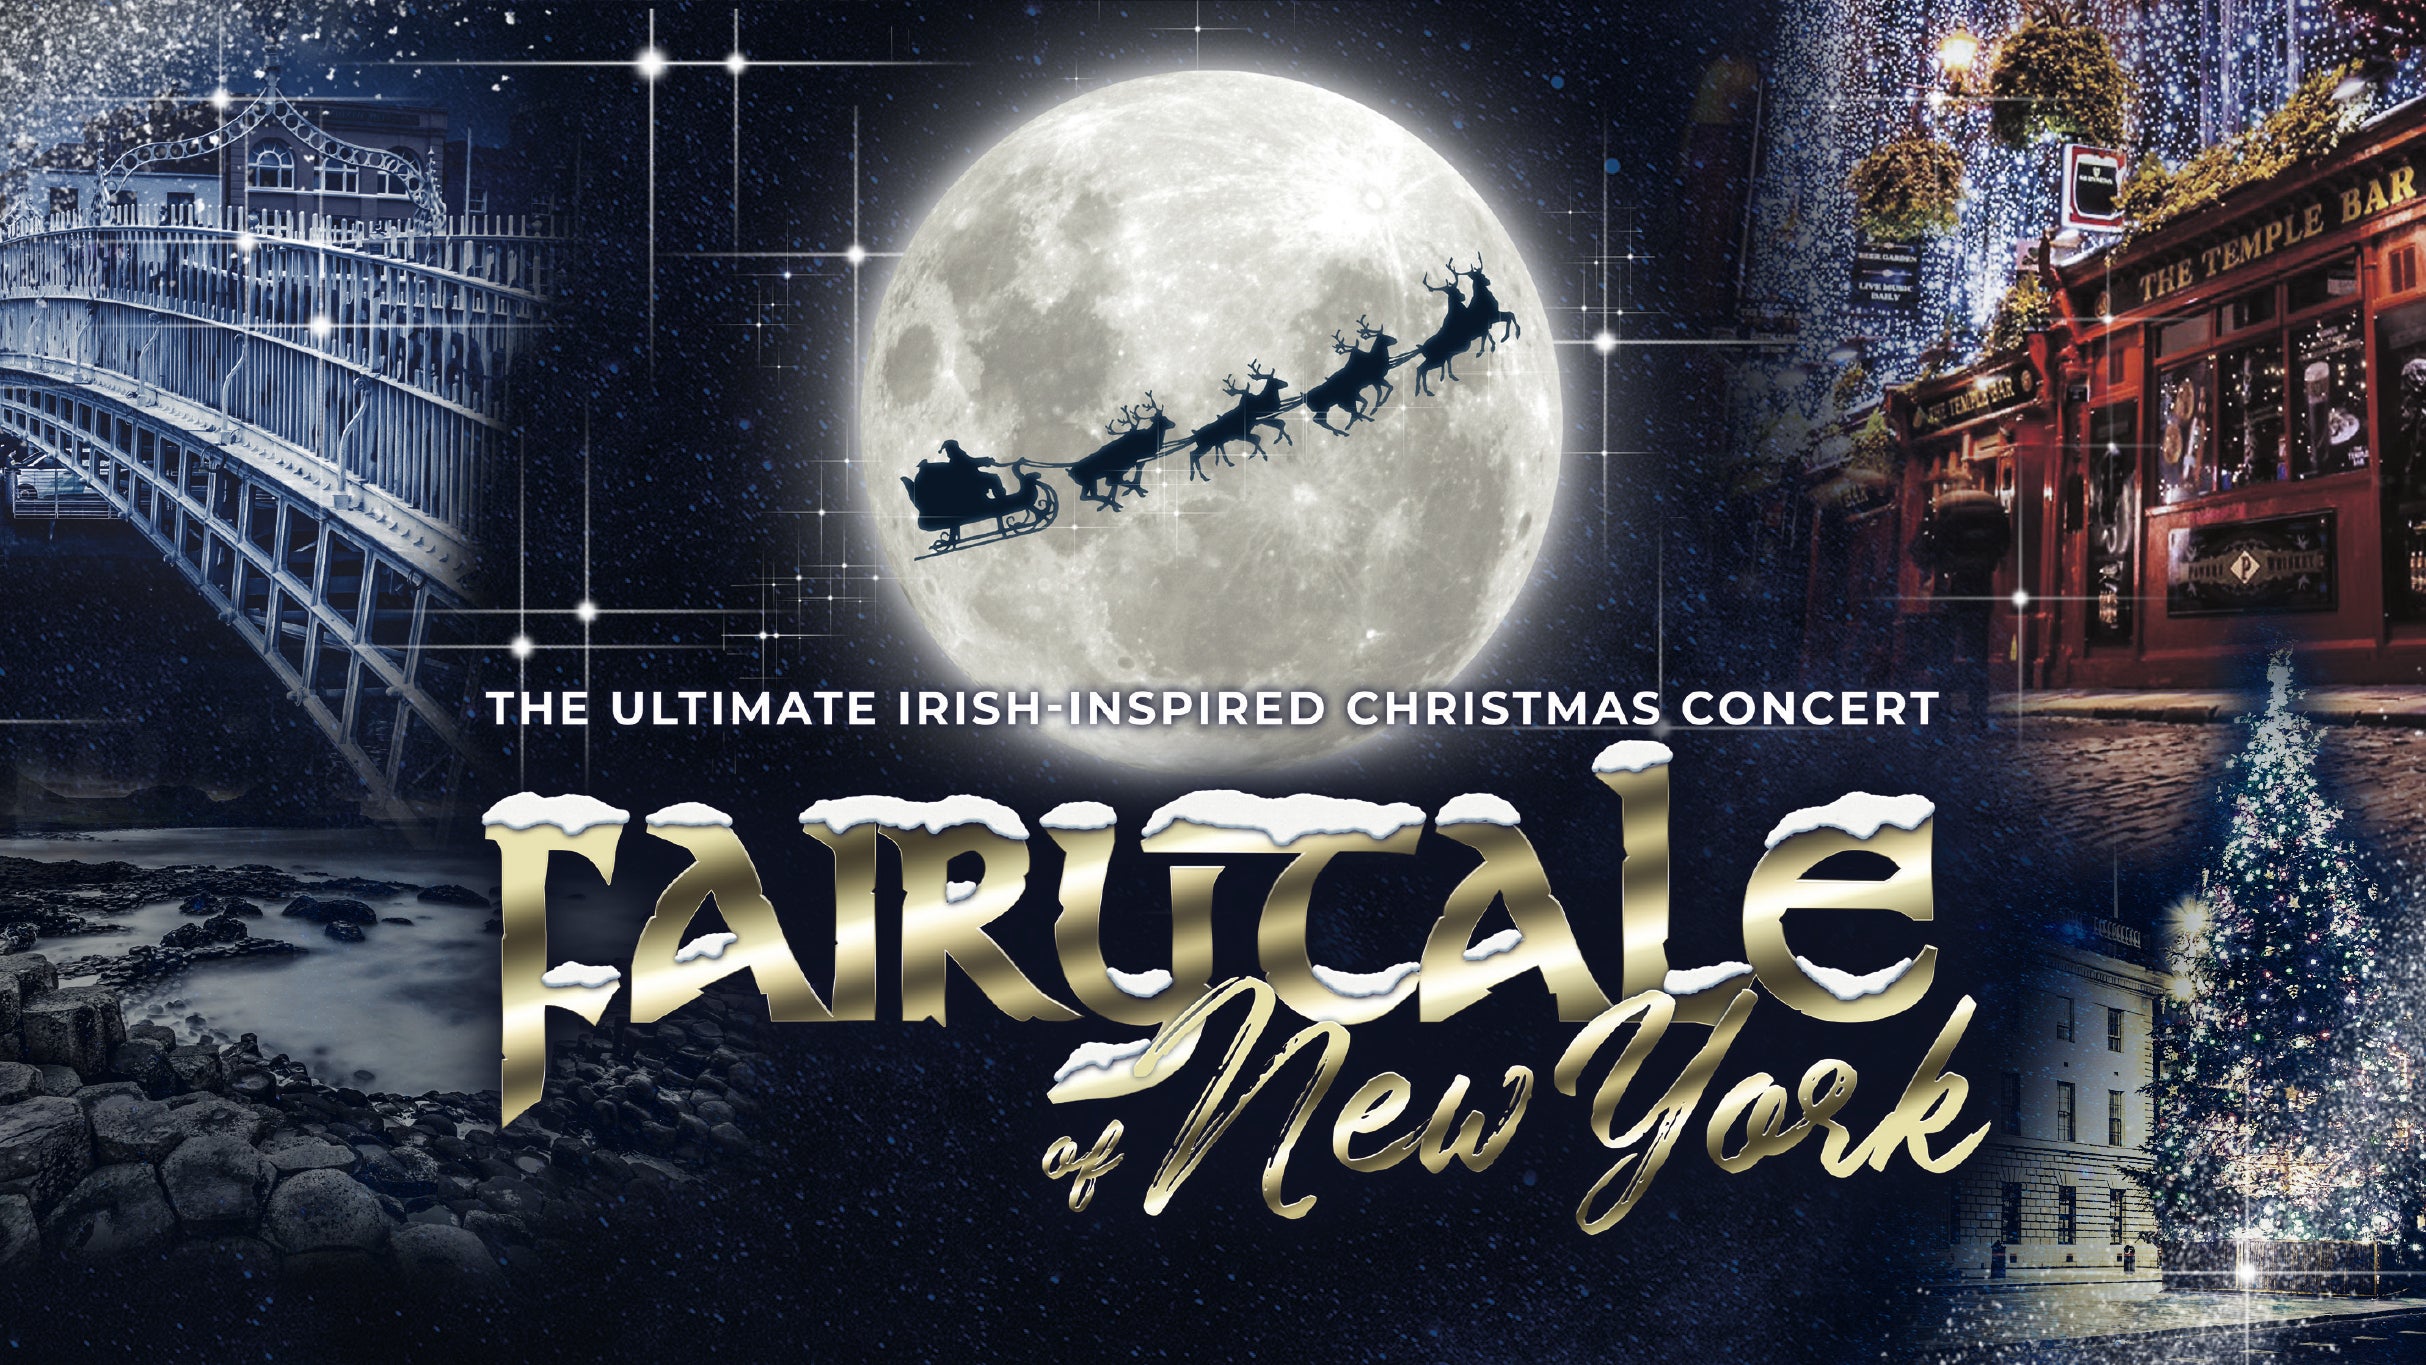 Fairytale of New York - Coming Home for Christmas pre-sale code